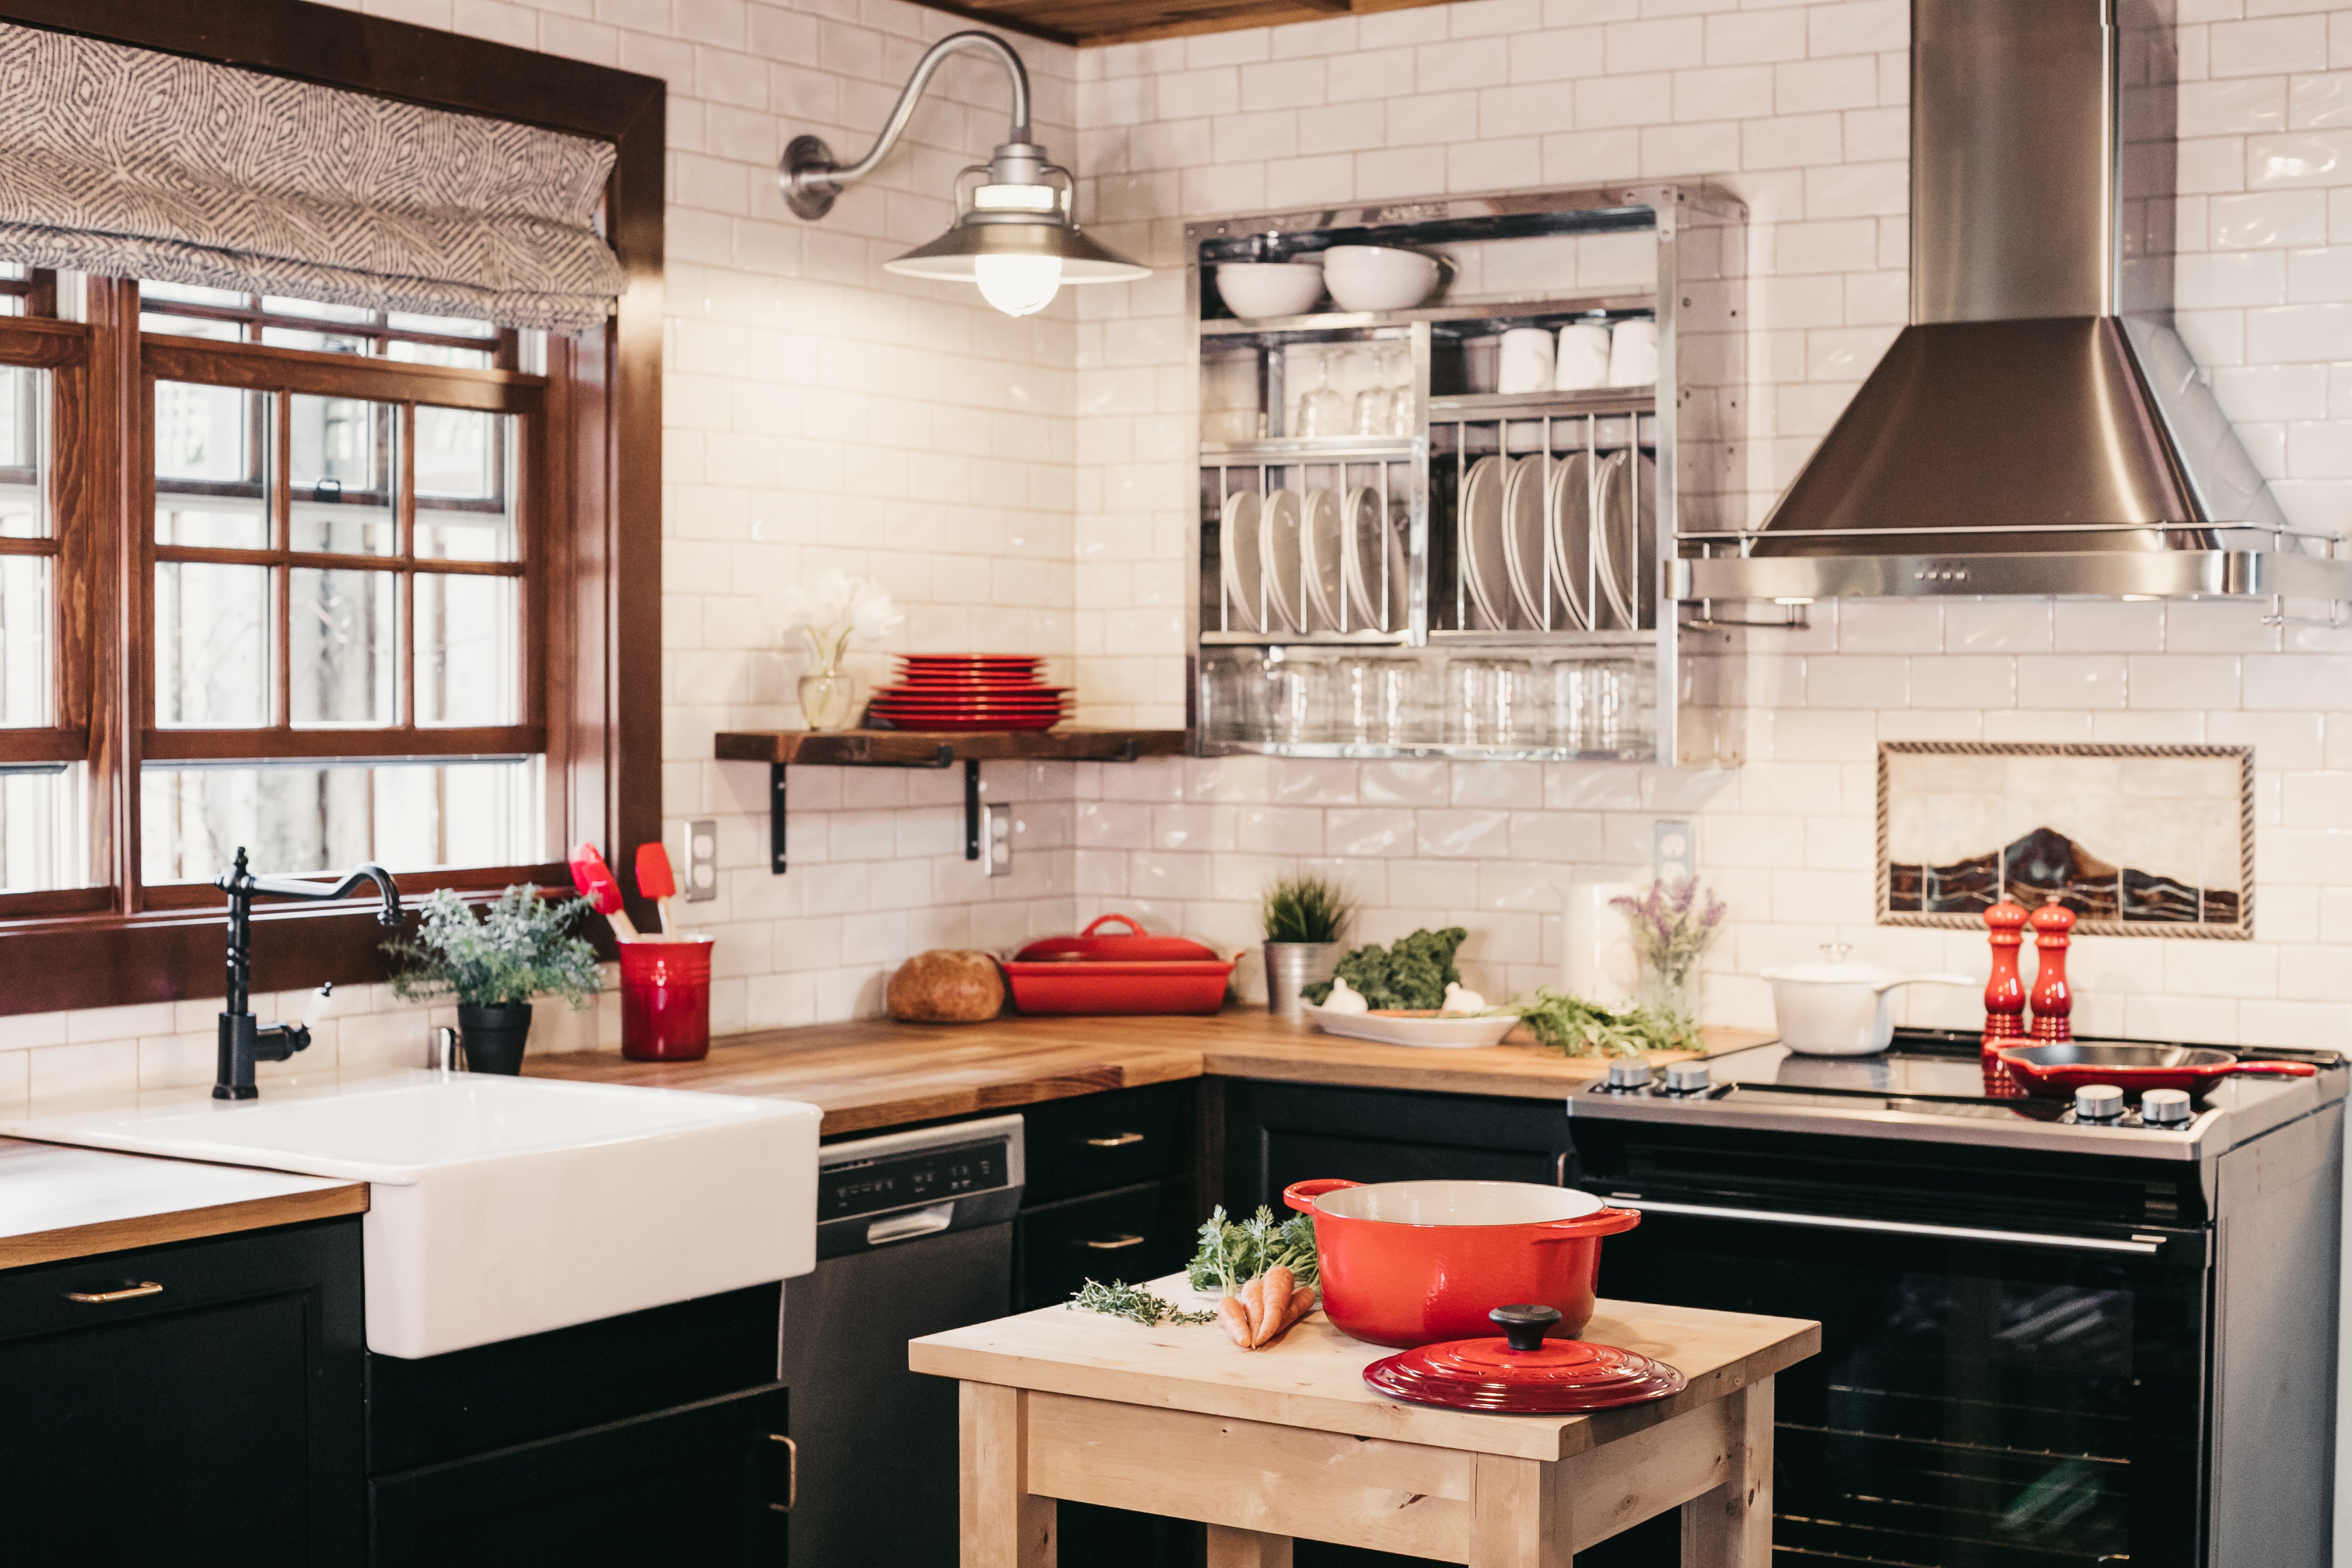 Inspirational Kitchen Trends For 2020 Interior Design Design News And Architecture Trends